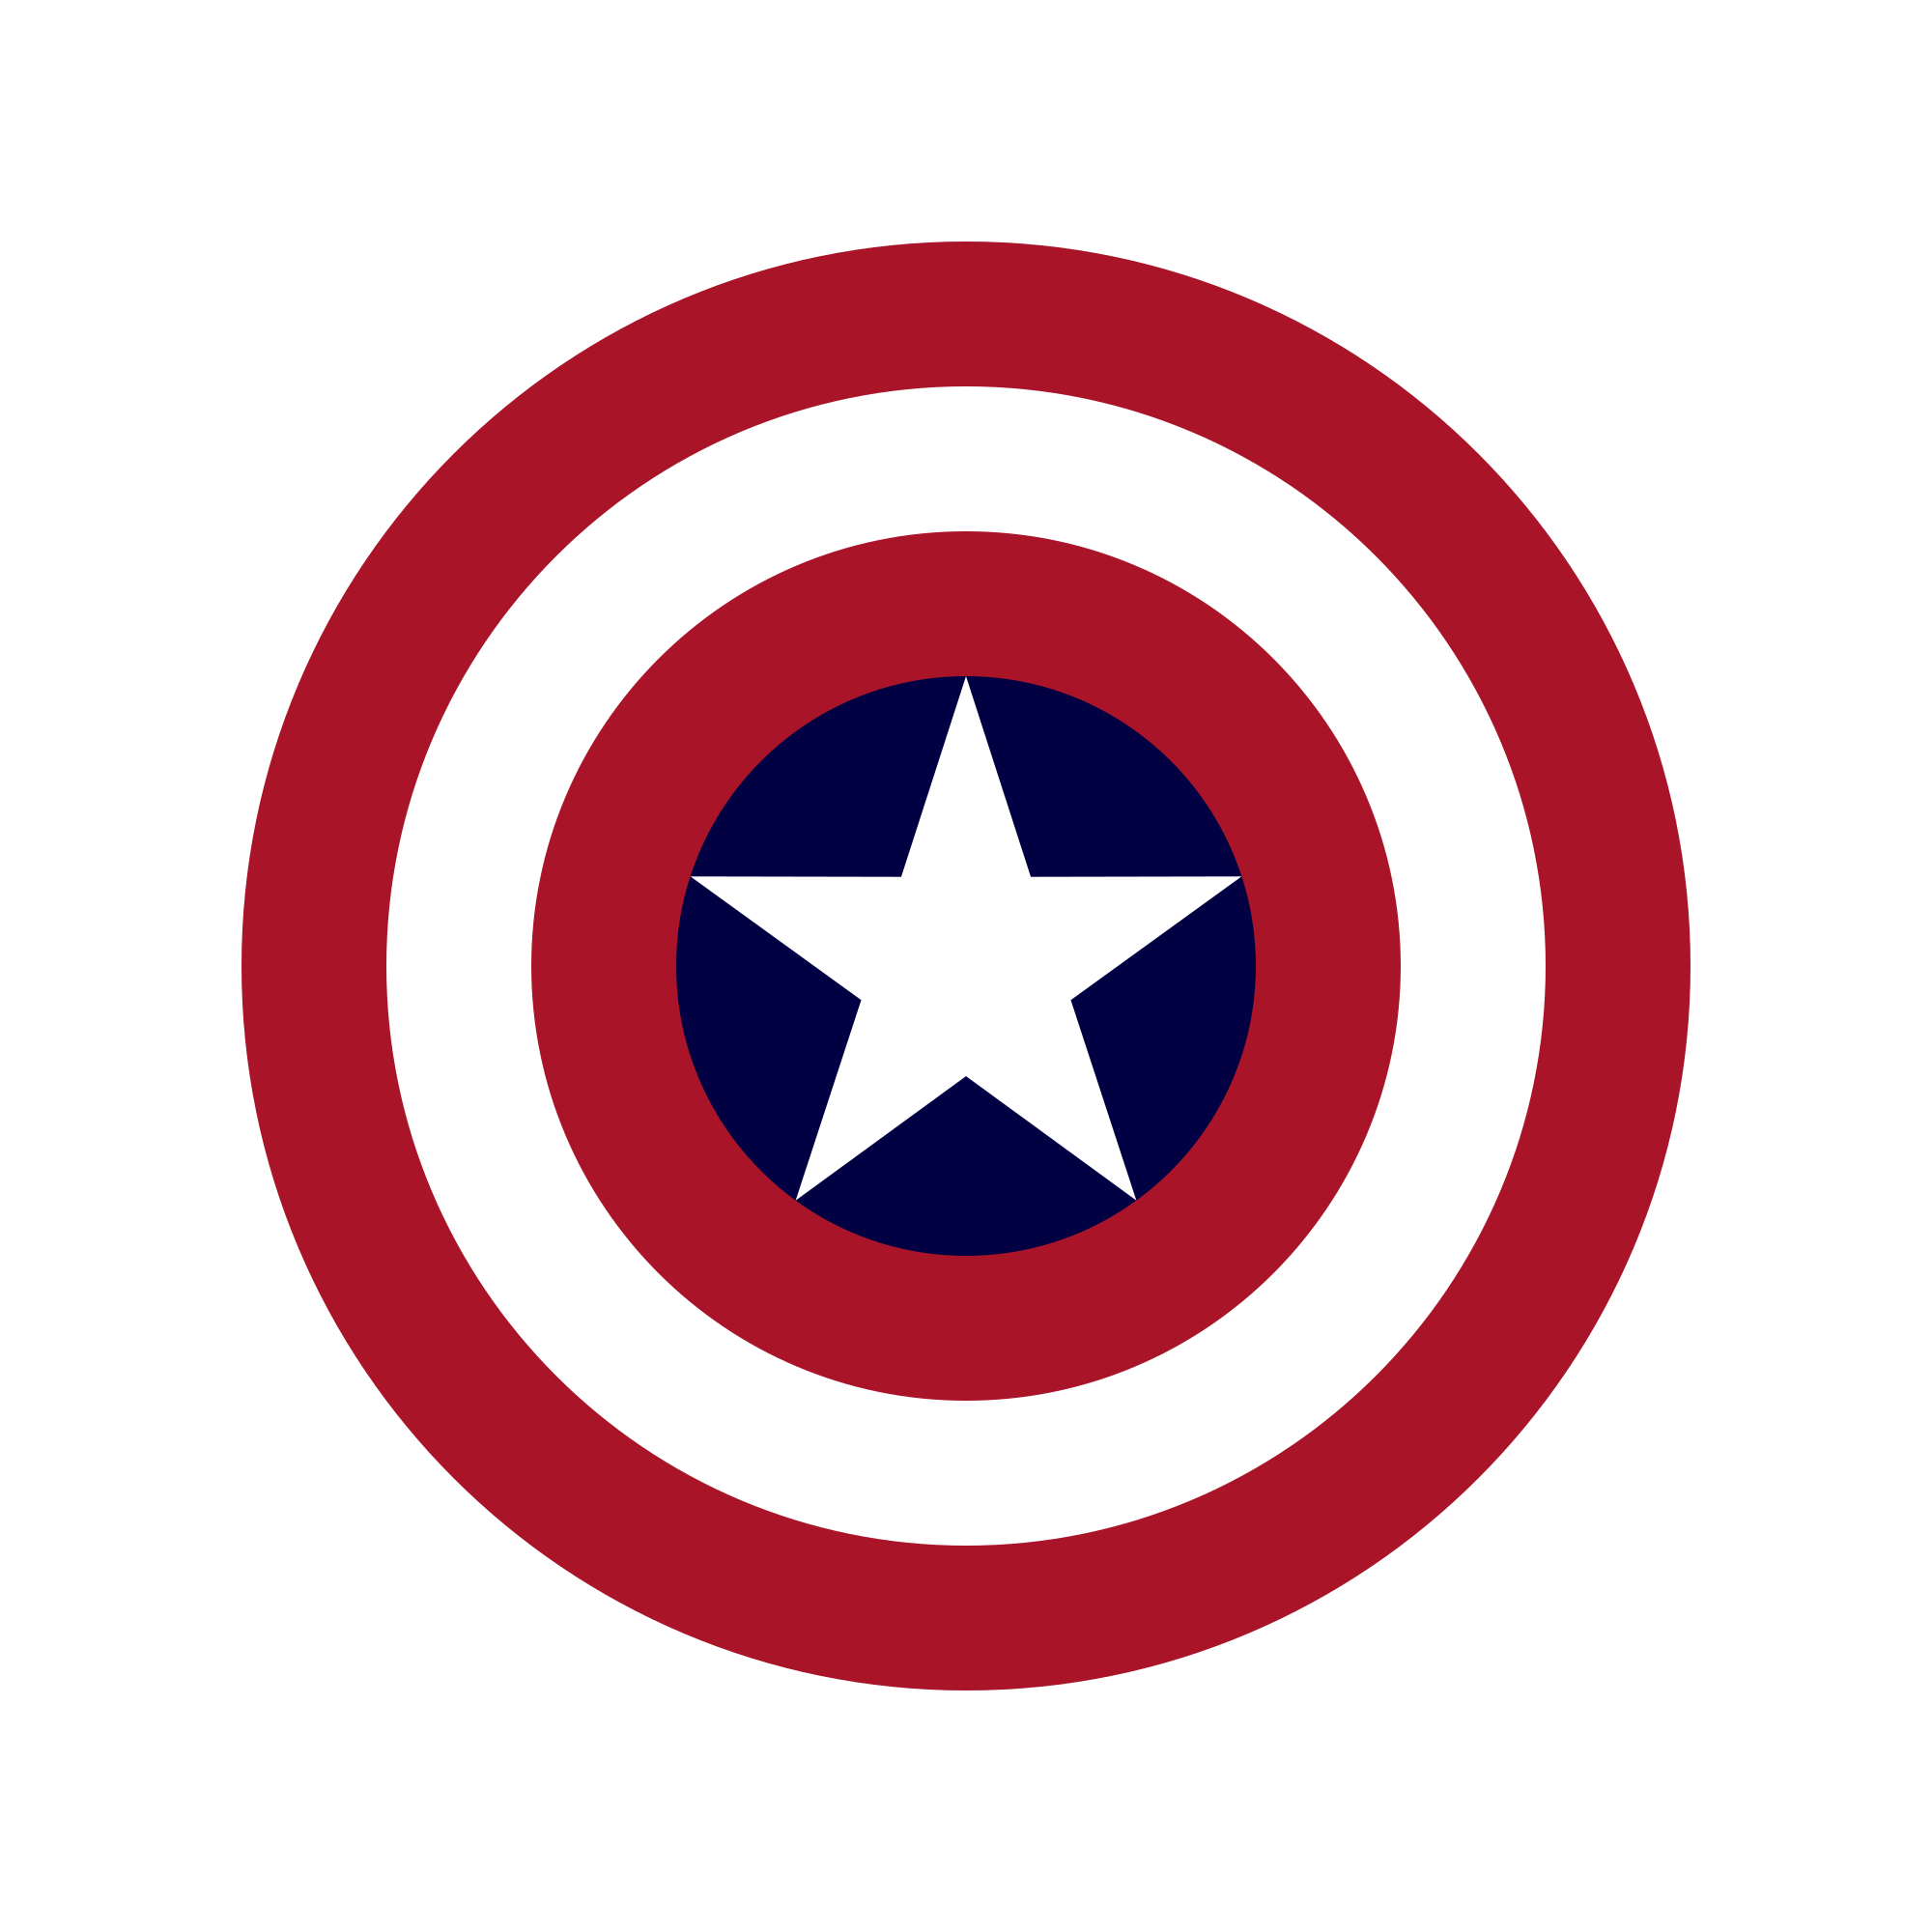 Gold Black and Red Shield Logo - Captain America's shield